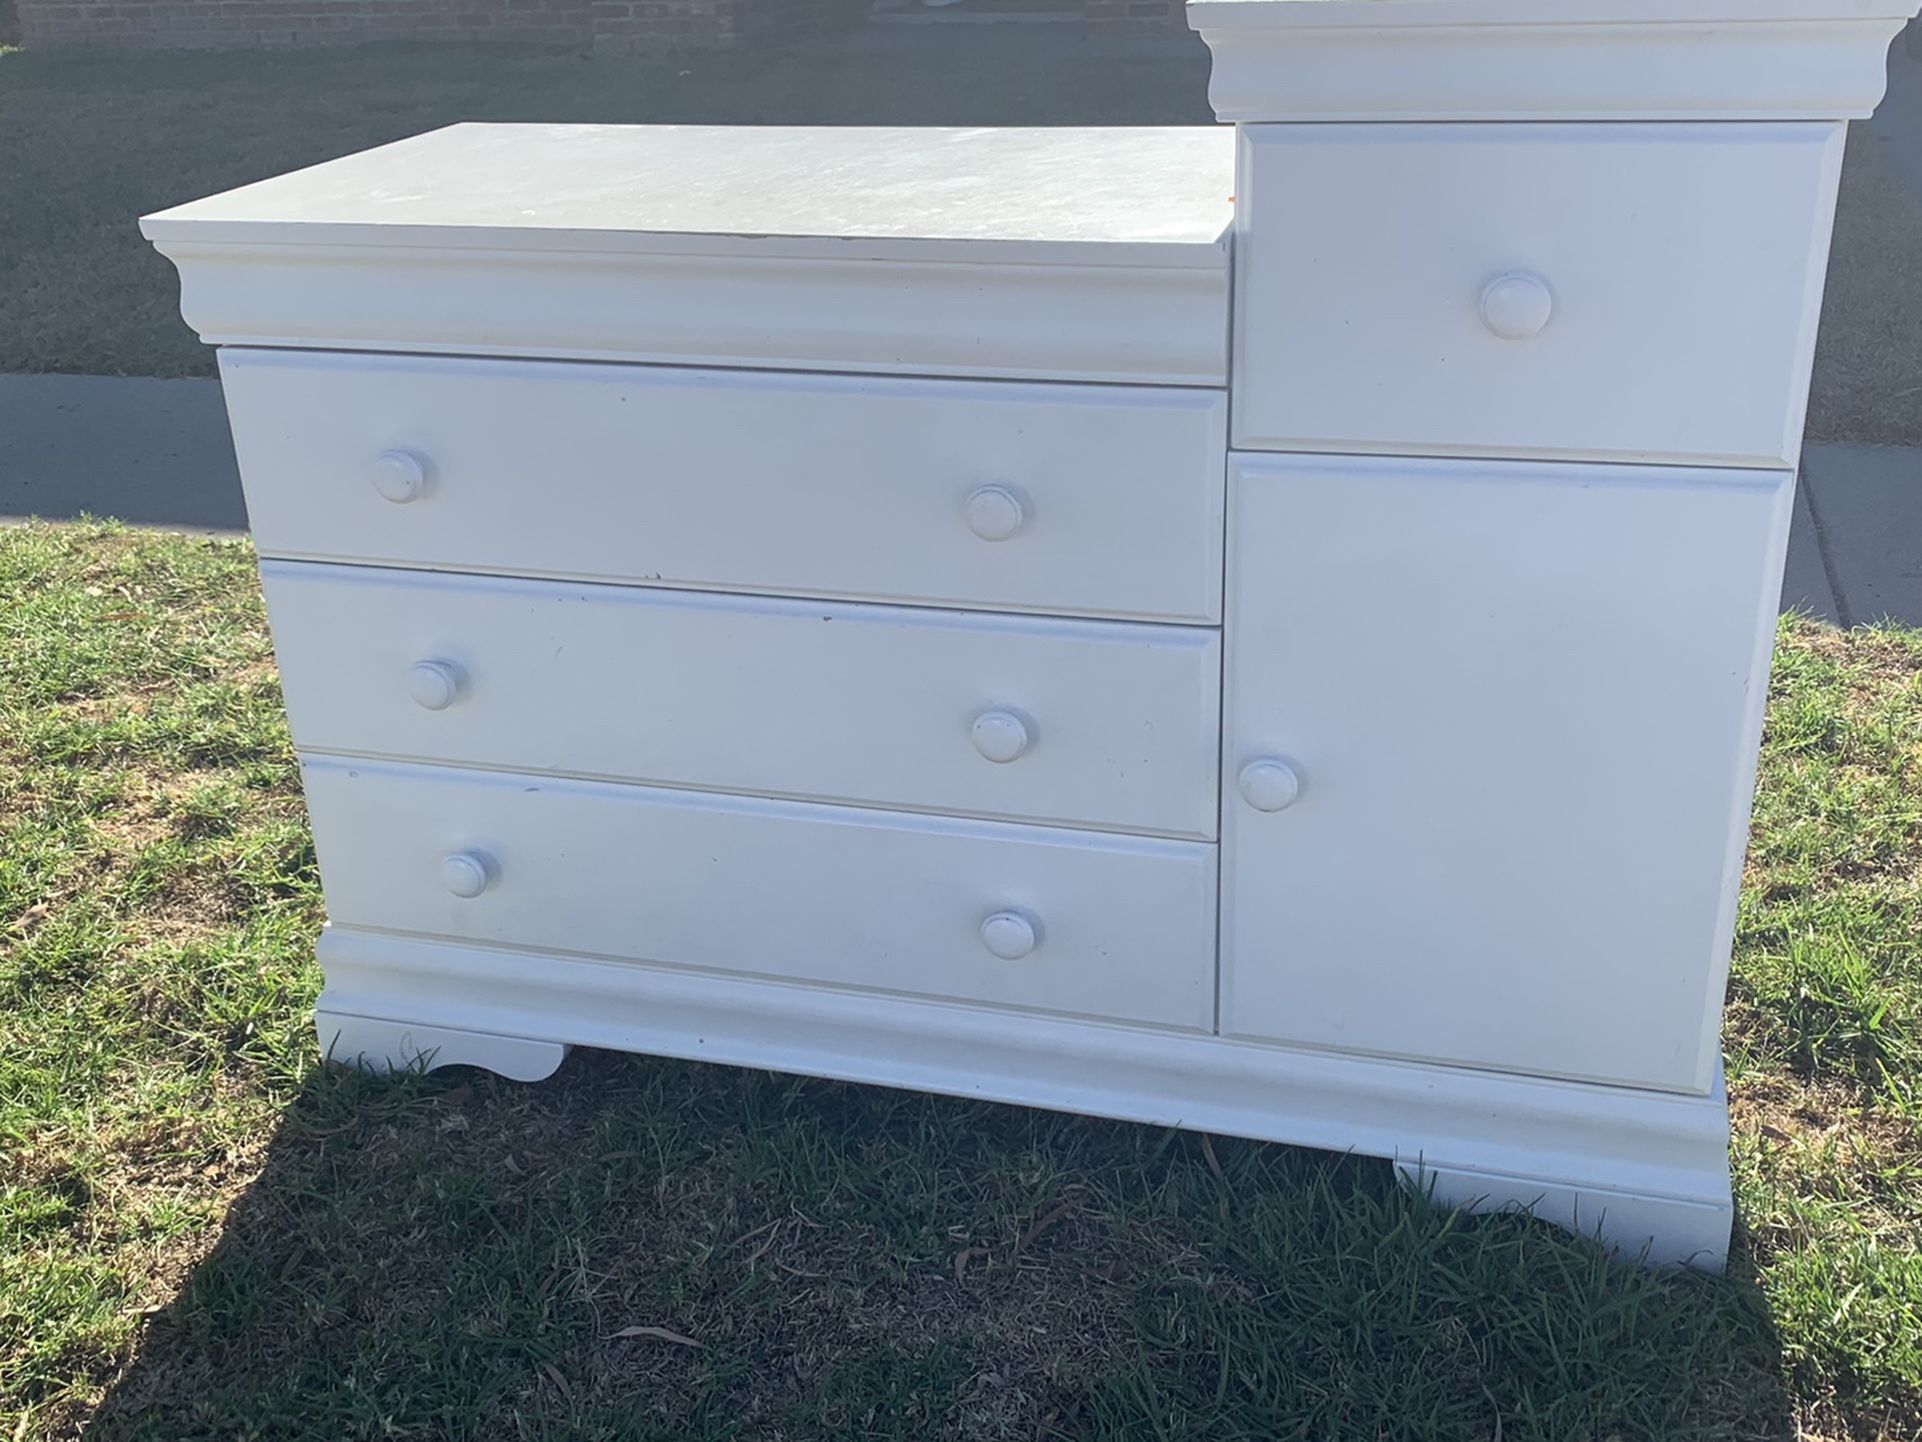 Dresser Changing Table